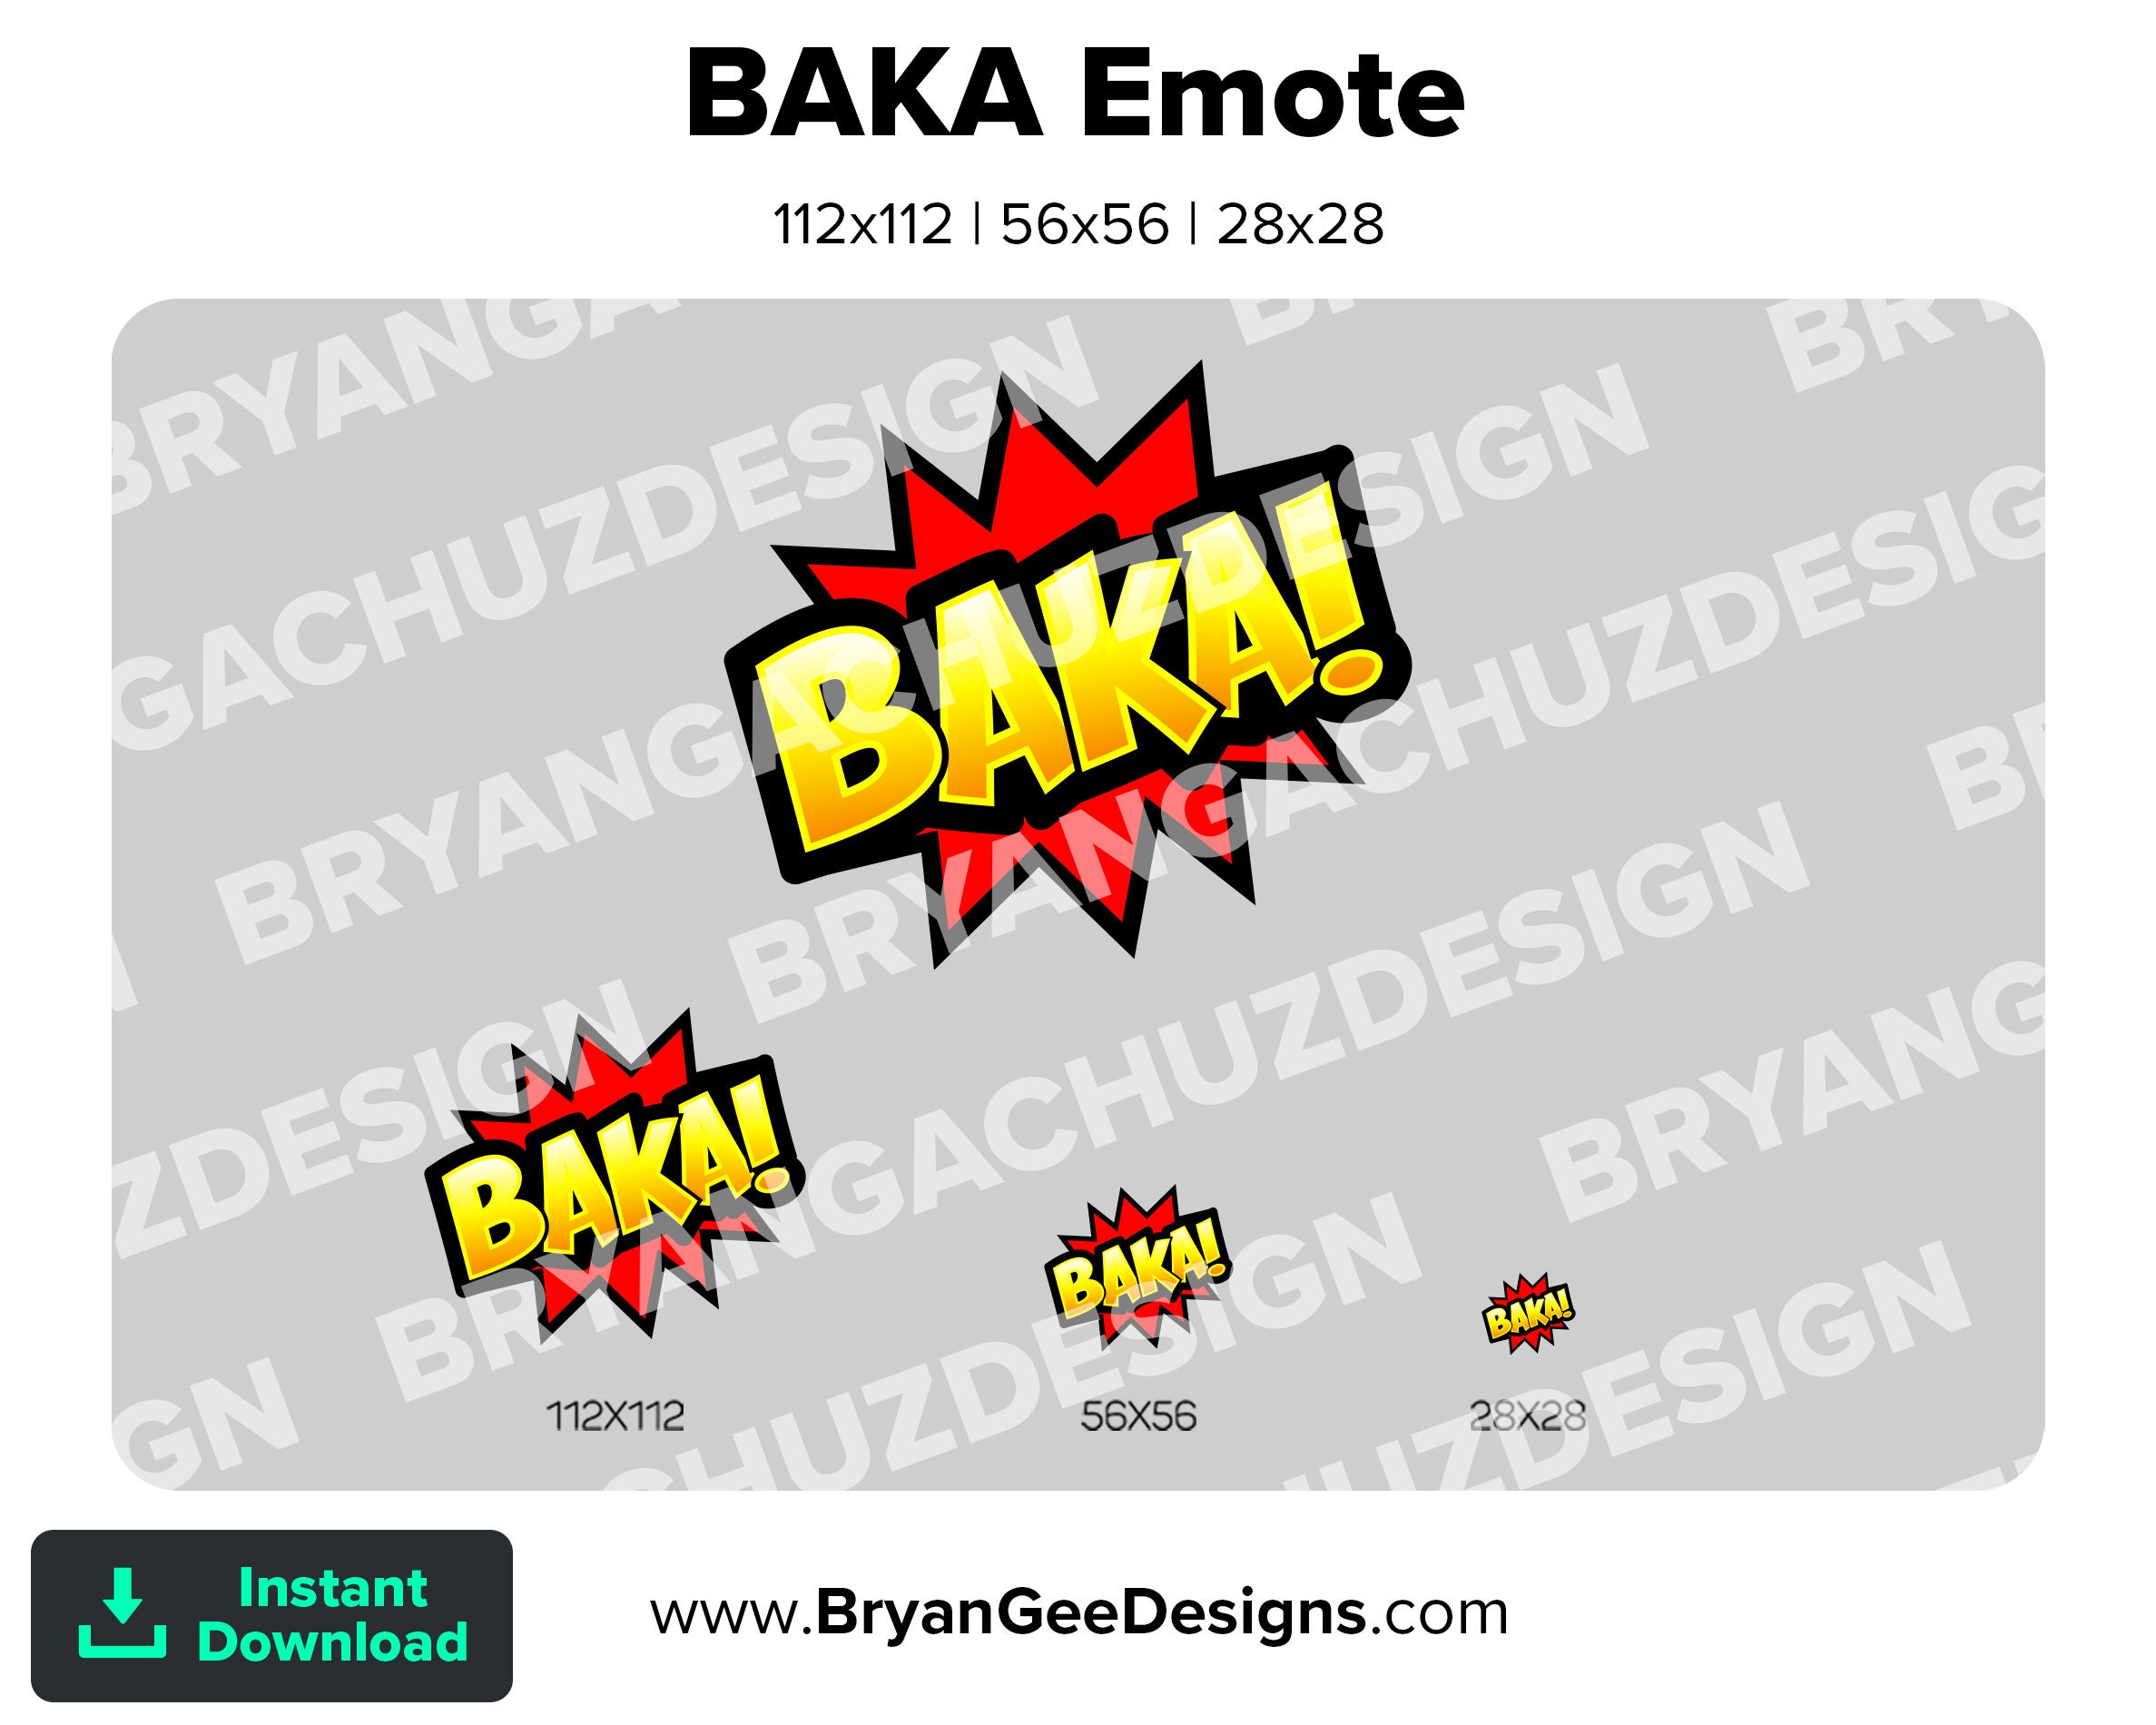 BAKA Emote for Twitch Discord or Youtube